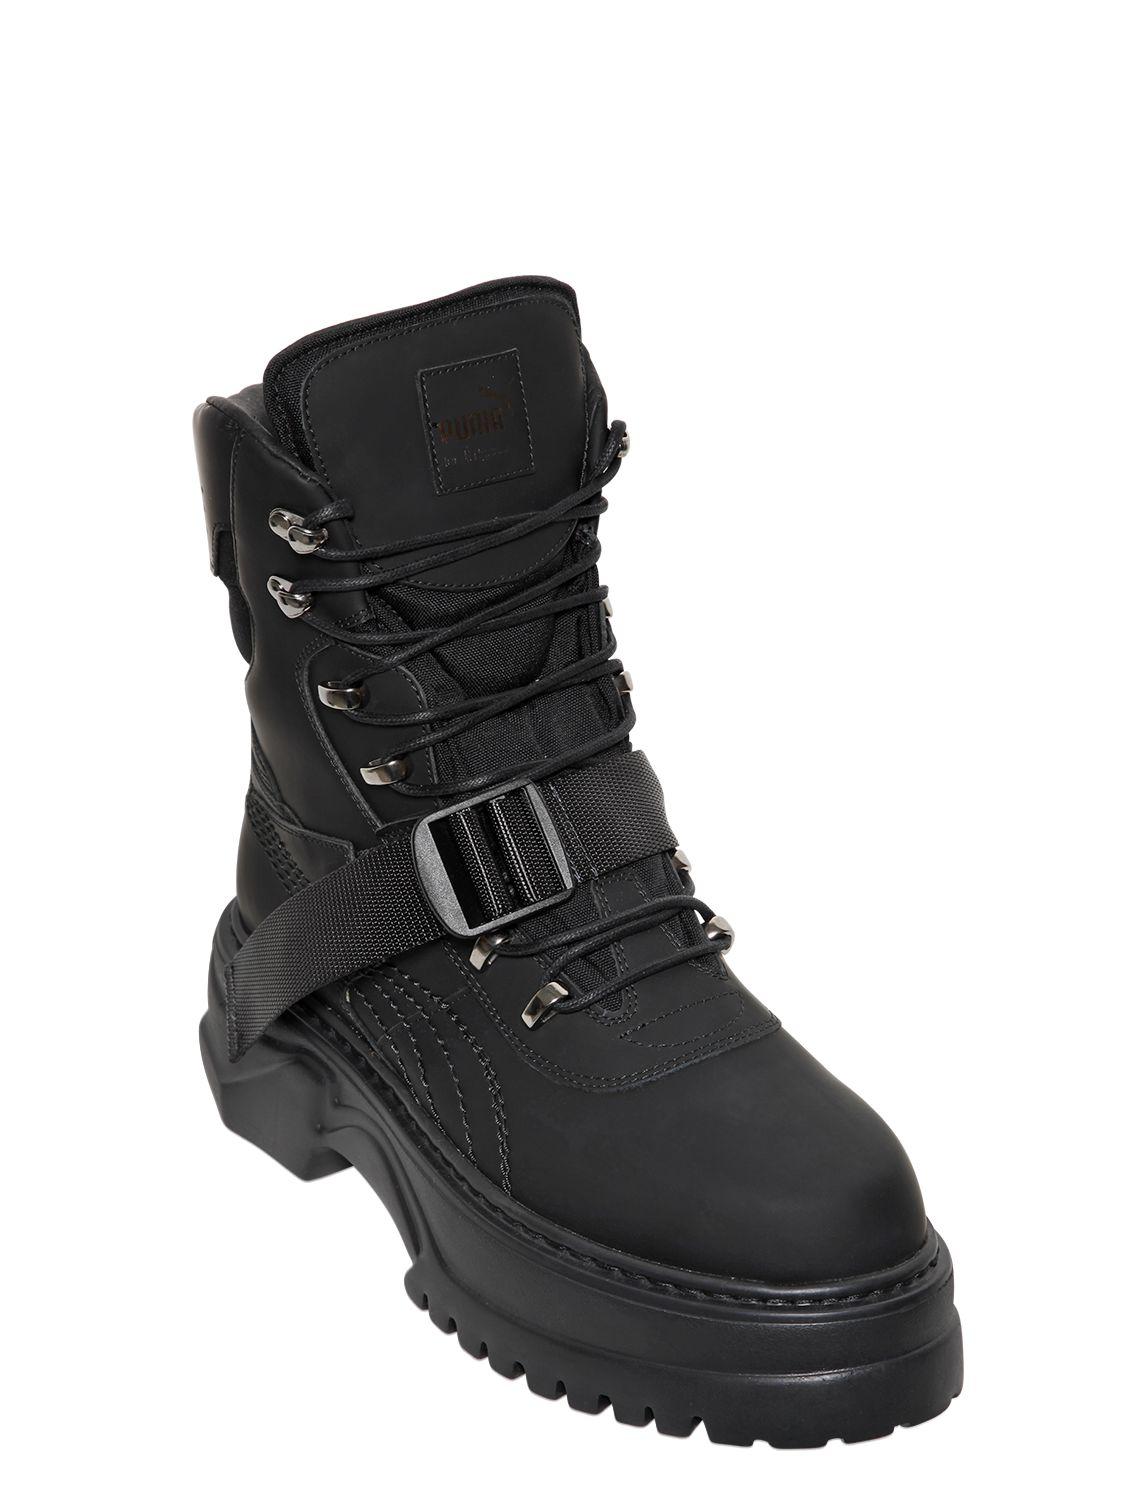 PUMA Winter Leather Boots in Black - Lyst